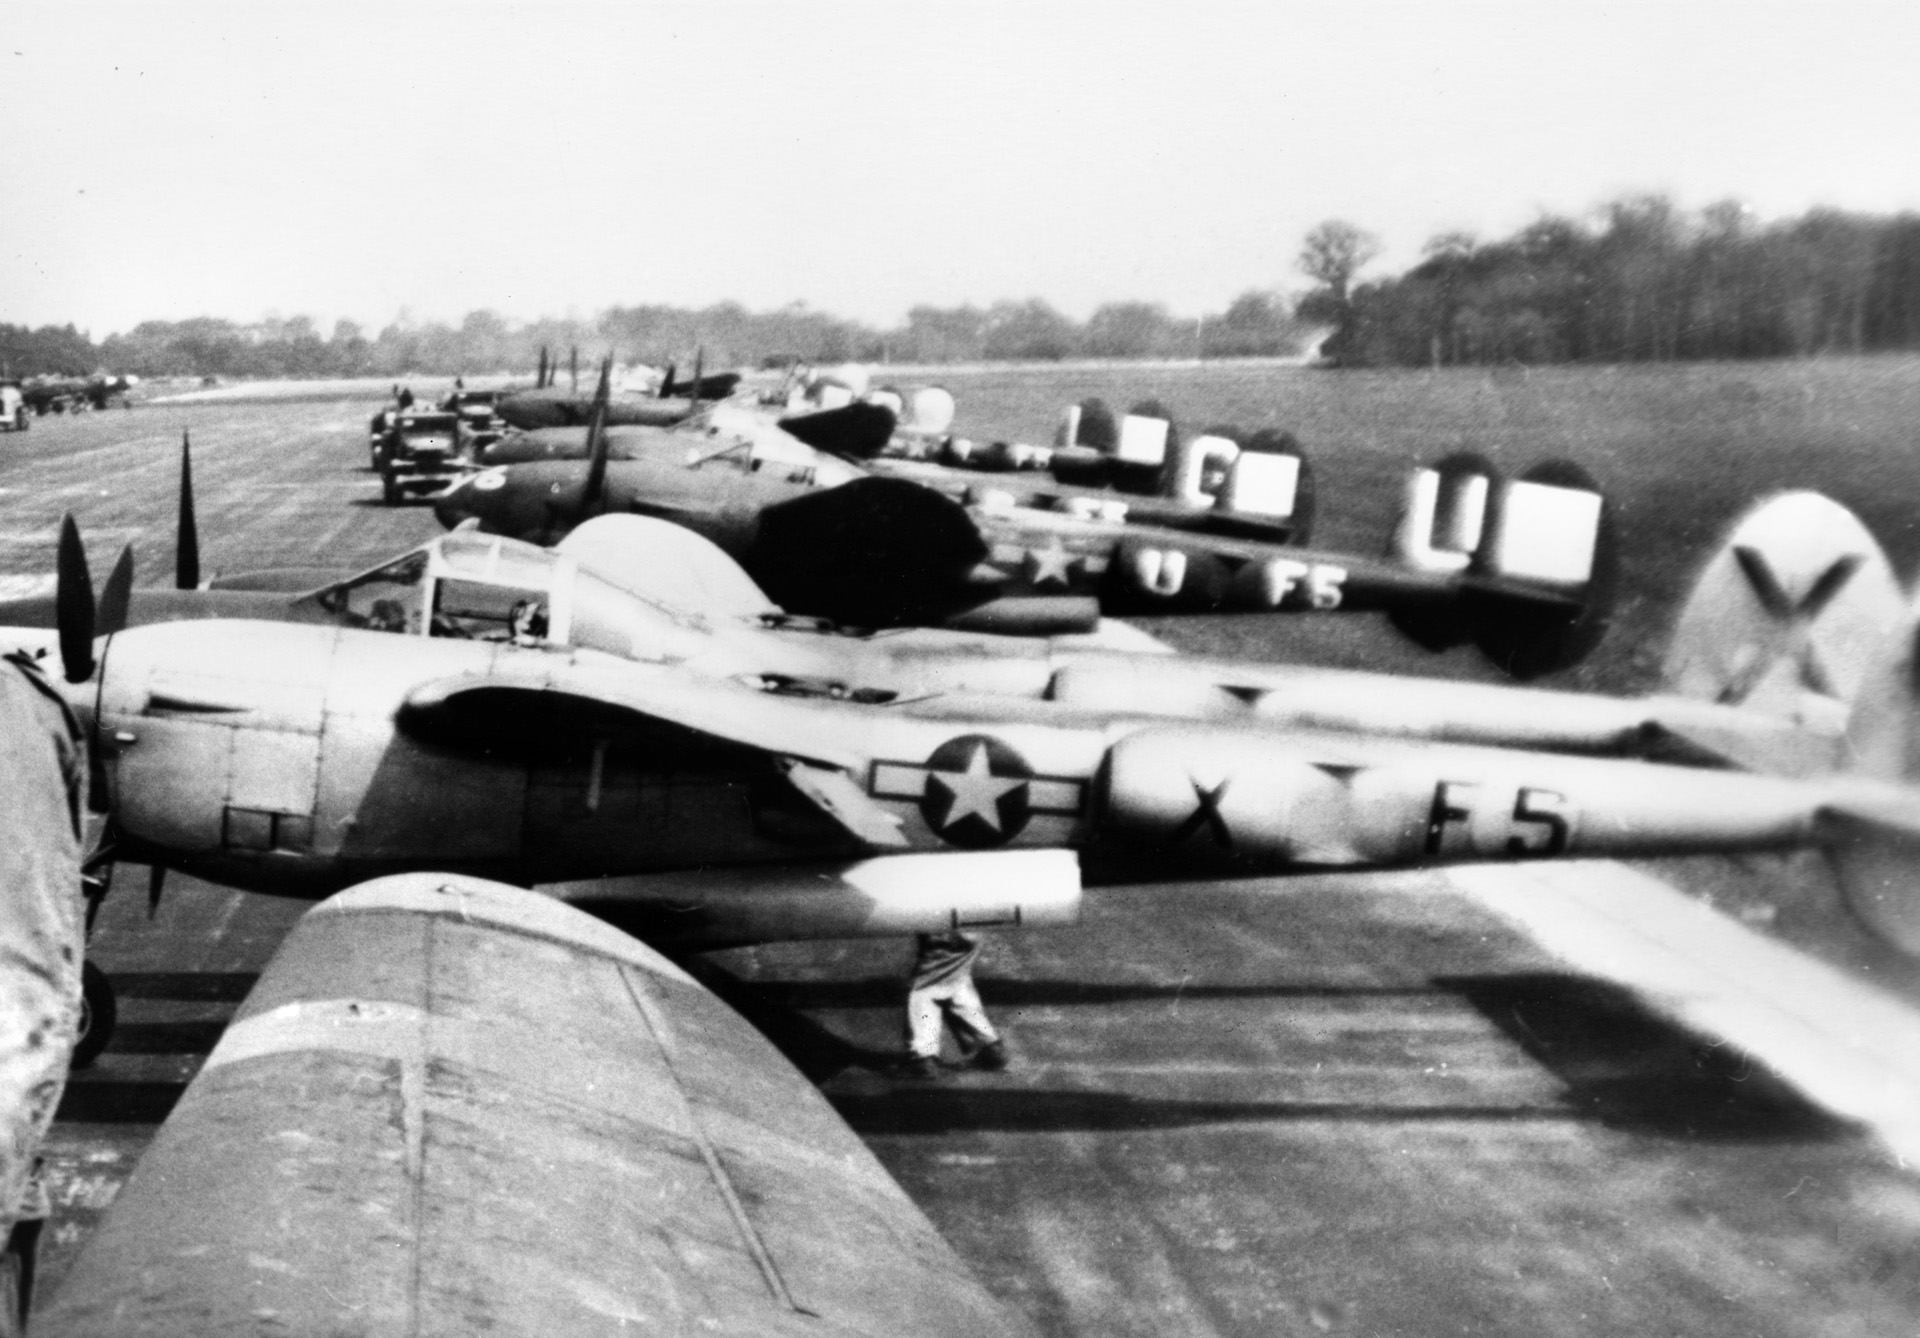 P-38 Lightning fighters of the 428th Fighter Squadron sit tightly grouped at an airfield prior to deployment. These aircraft have not been emblazoned with their D-Day recognition stripes, so this photo was probably taken during the weeks leading up to the June 6, 1944, Normandy invasion at RAF Warmwell airfield in England. 